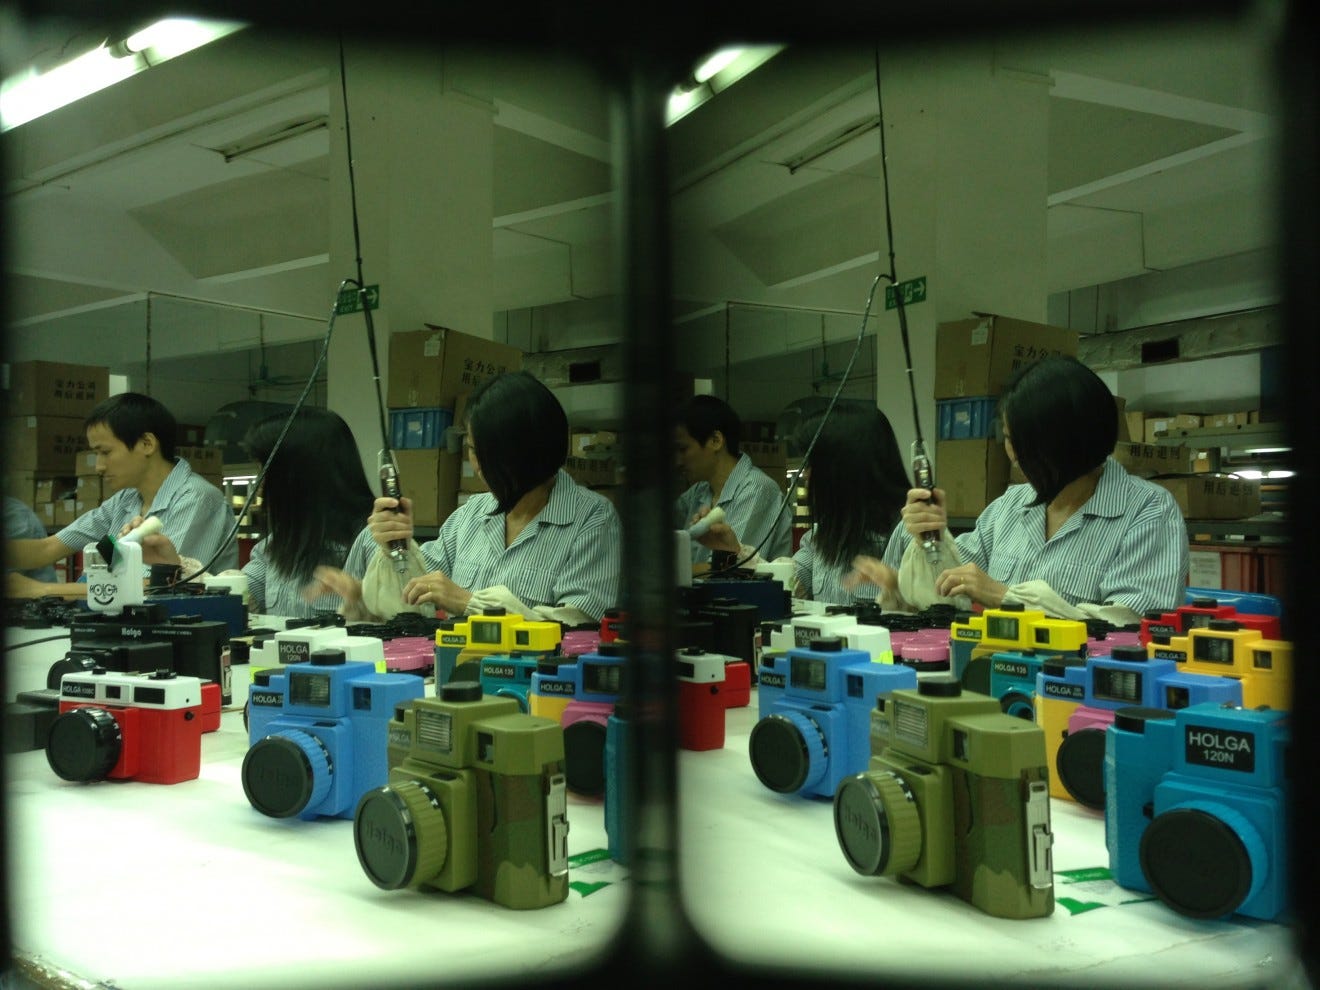 The now-closed Holga factory in Guangdong Province, China.